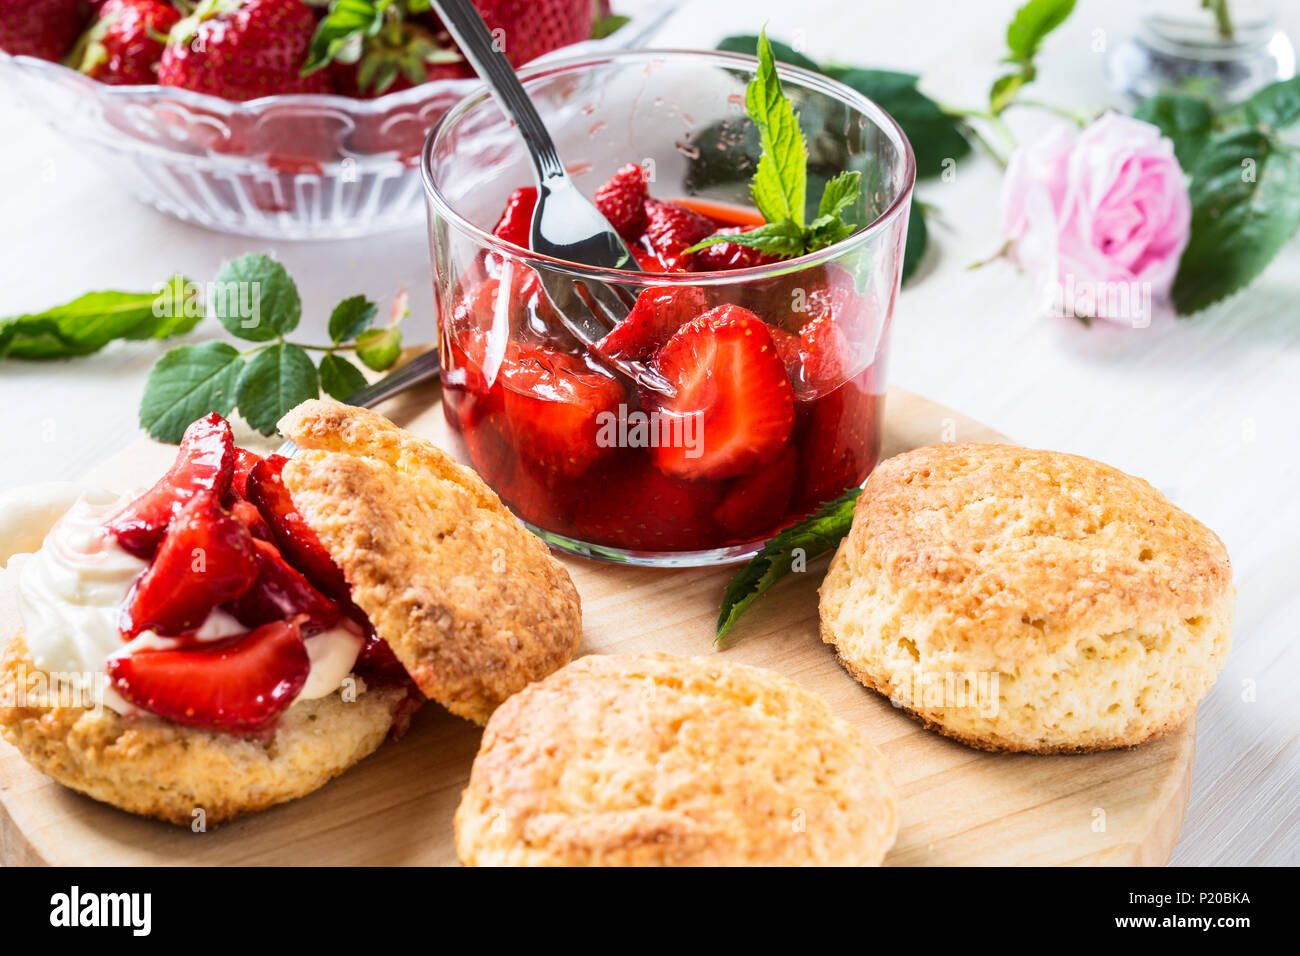 Homemade strawberry shortcake with vanilla whipped cream and berry compote Stock Photo